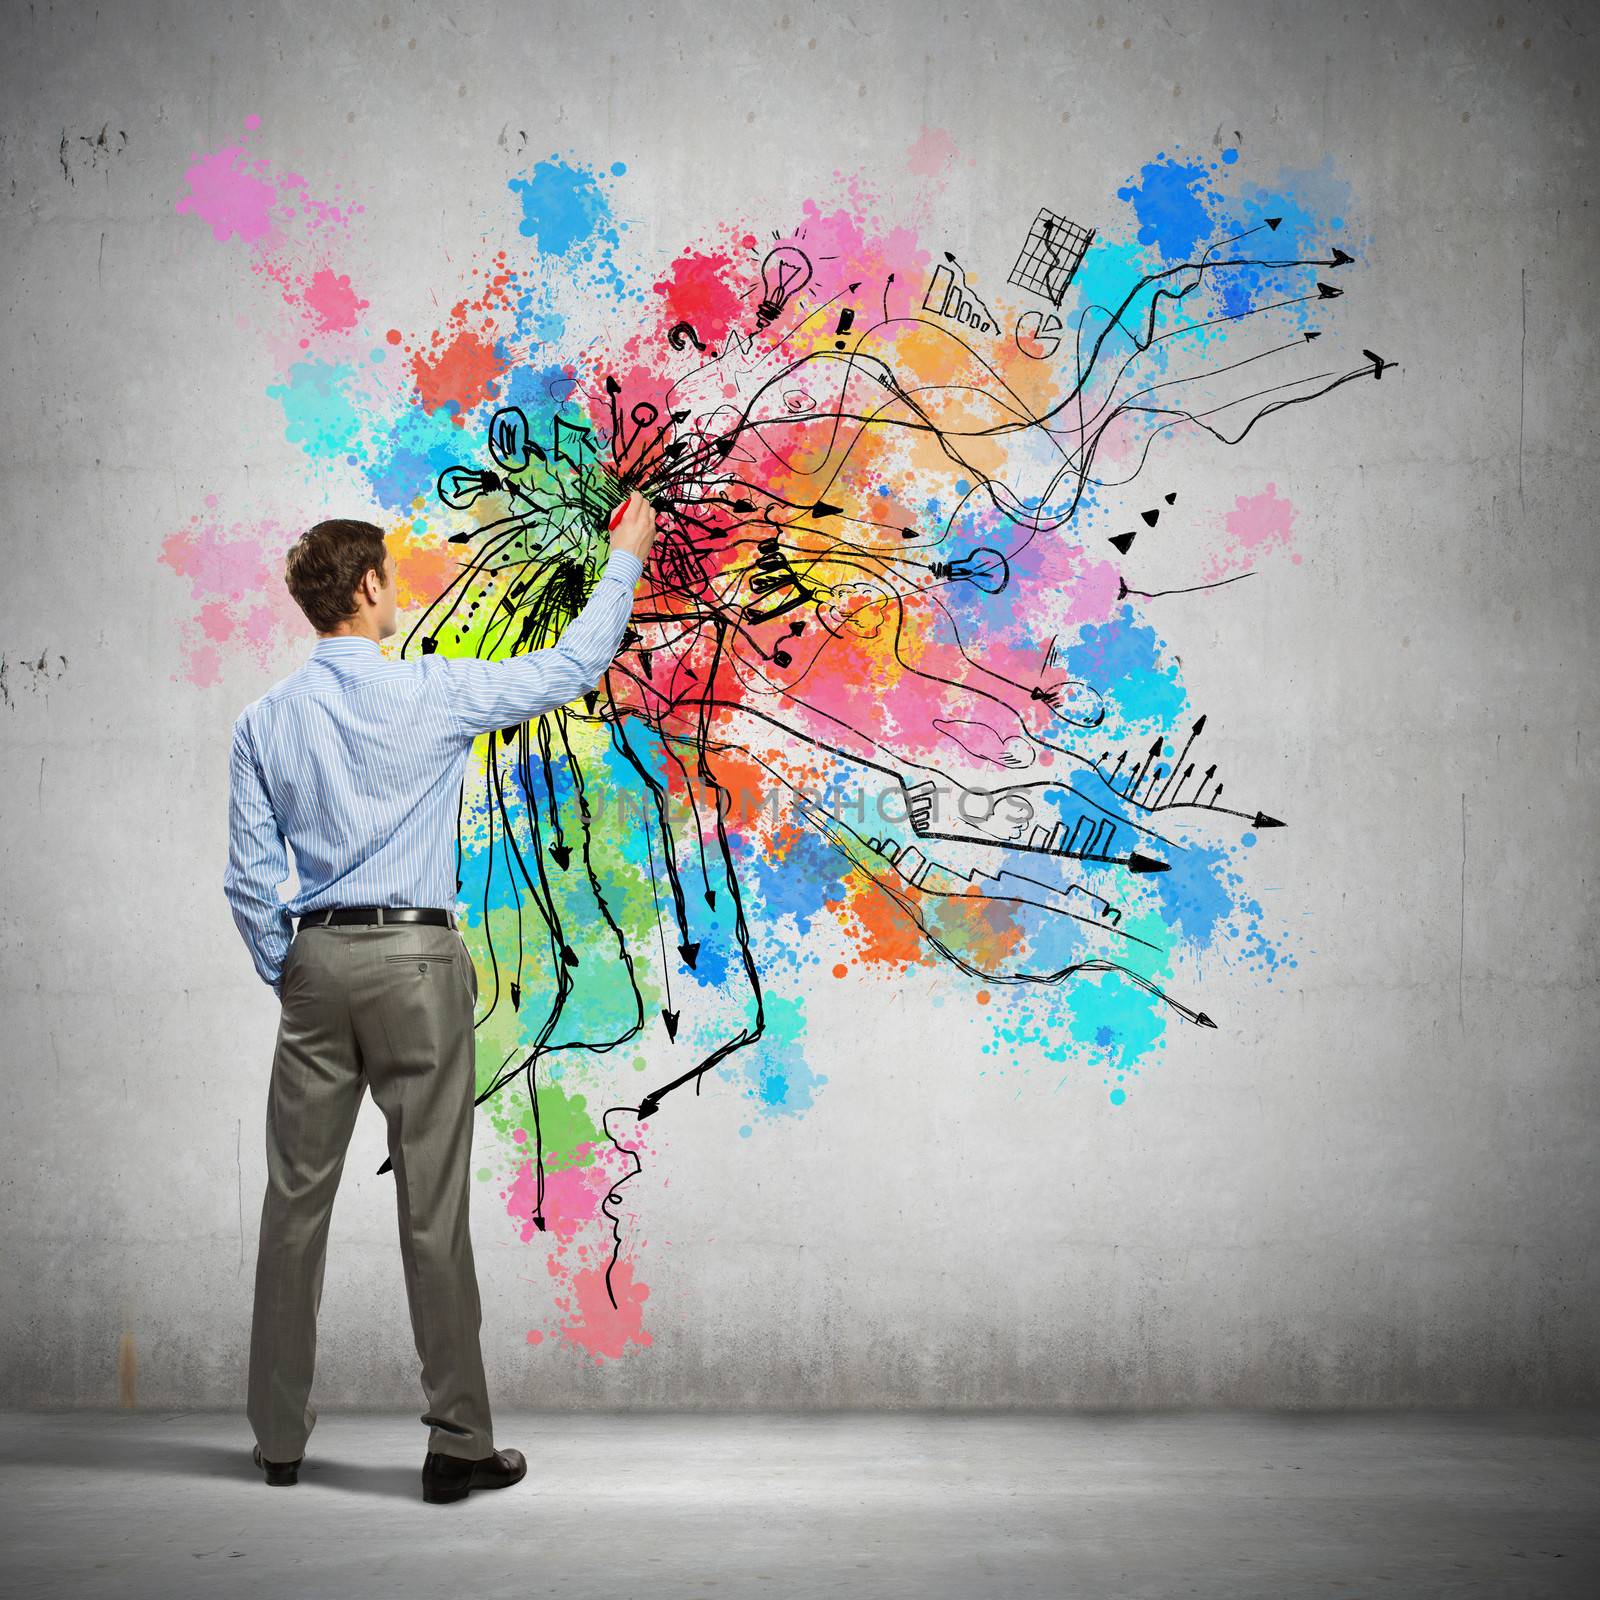 Back view of businessman drawing colorful business ideas on wall